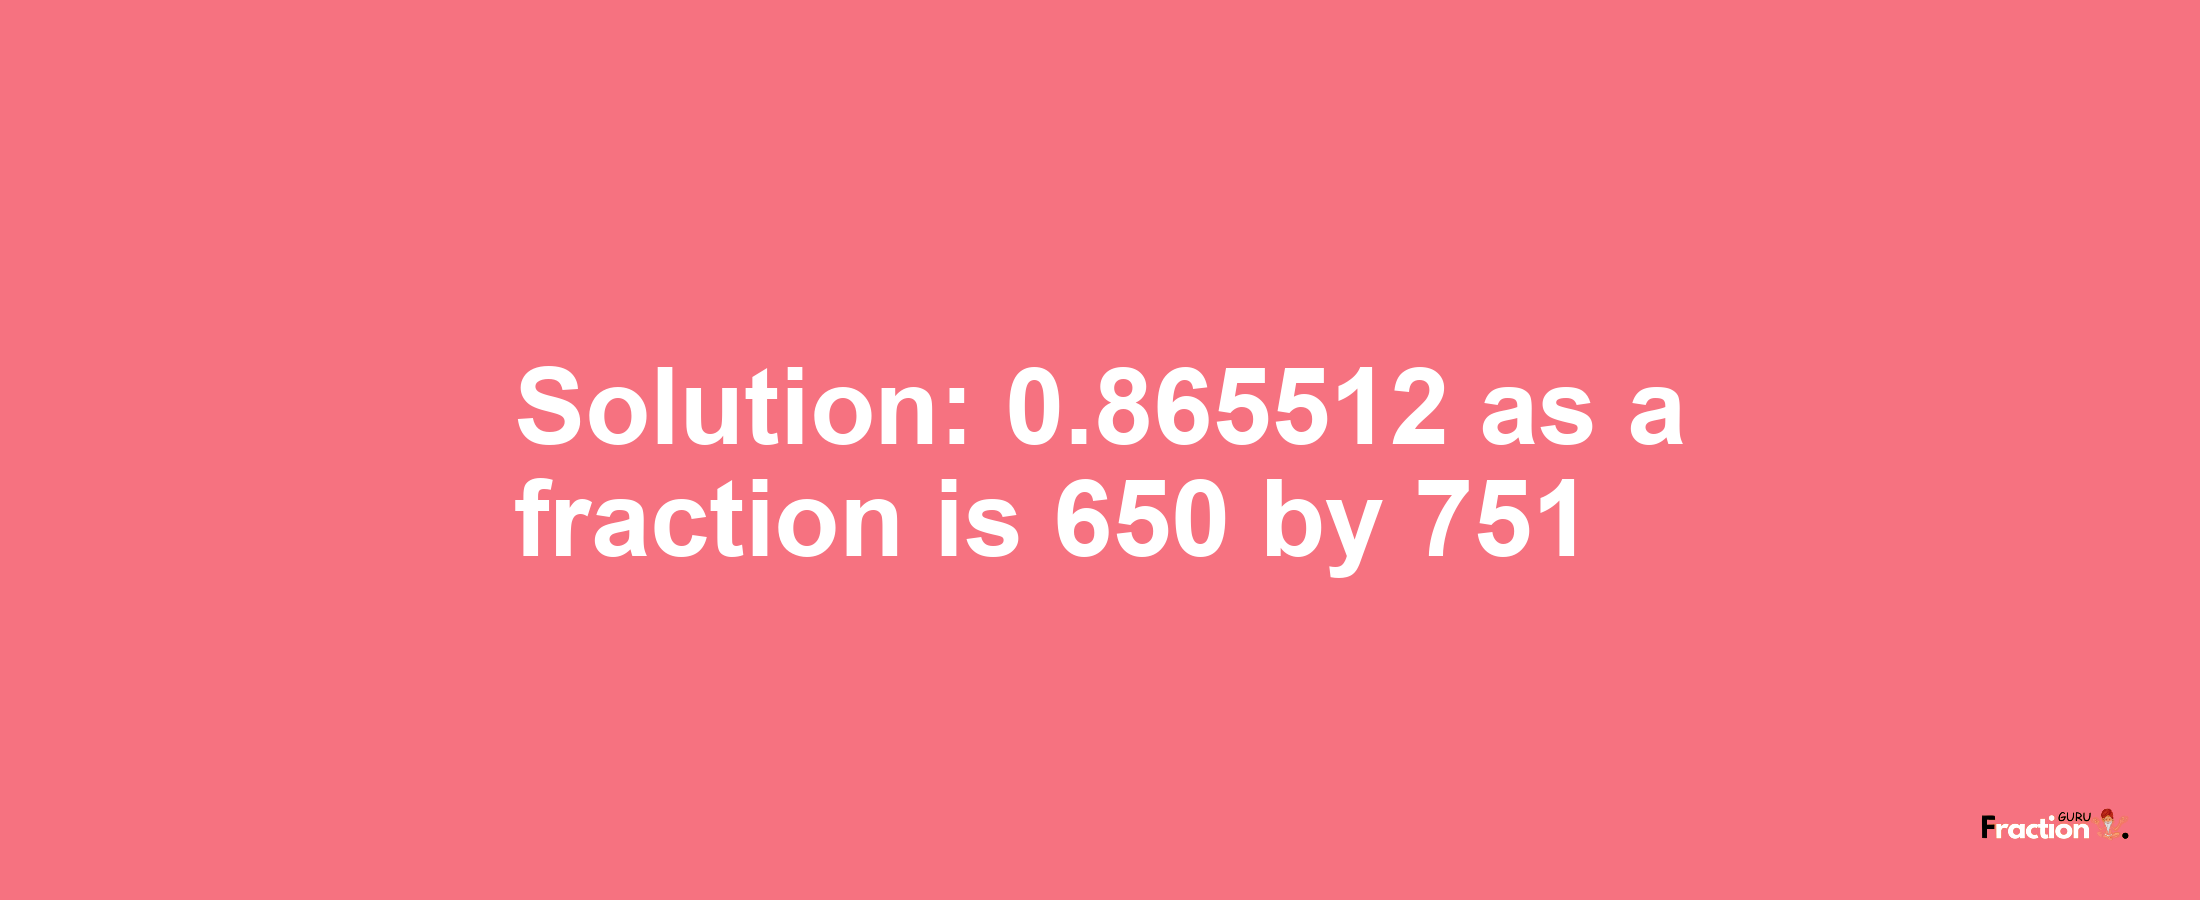 Solution:0.865512 as a fraction is 650/751